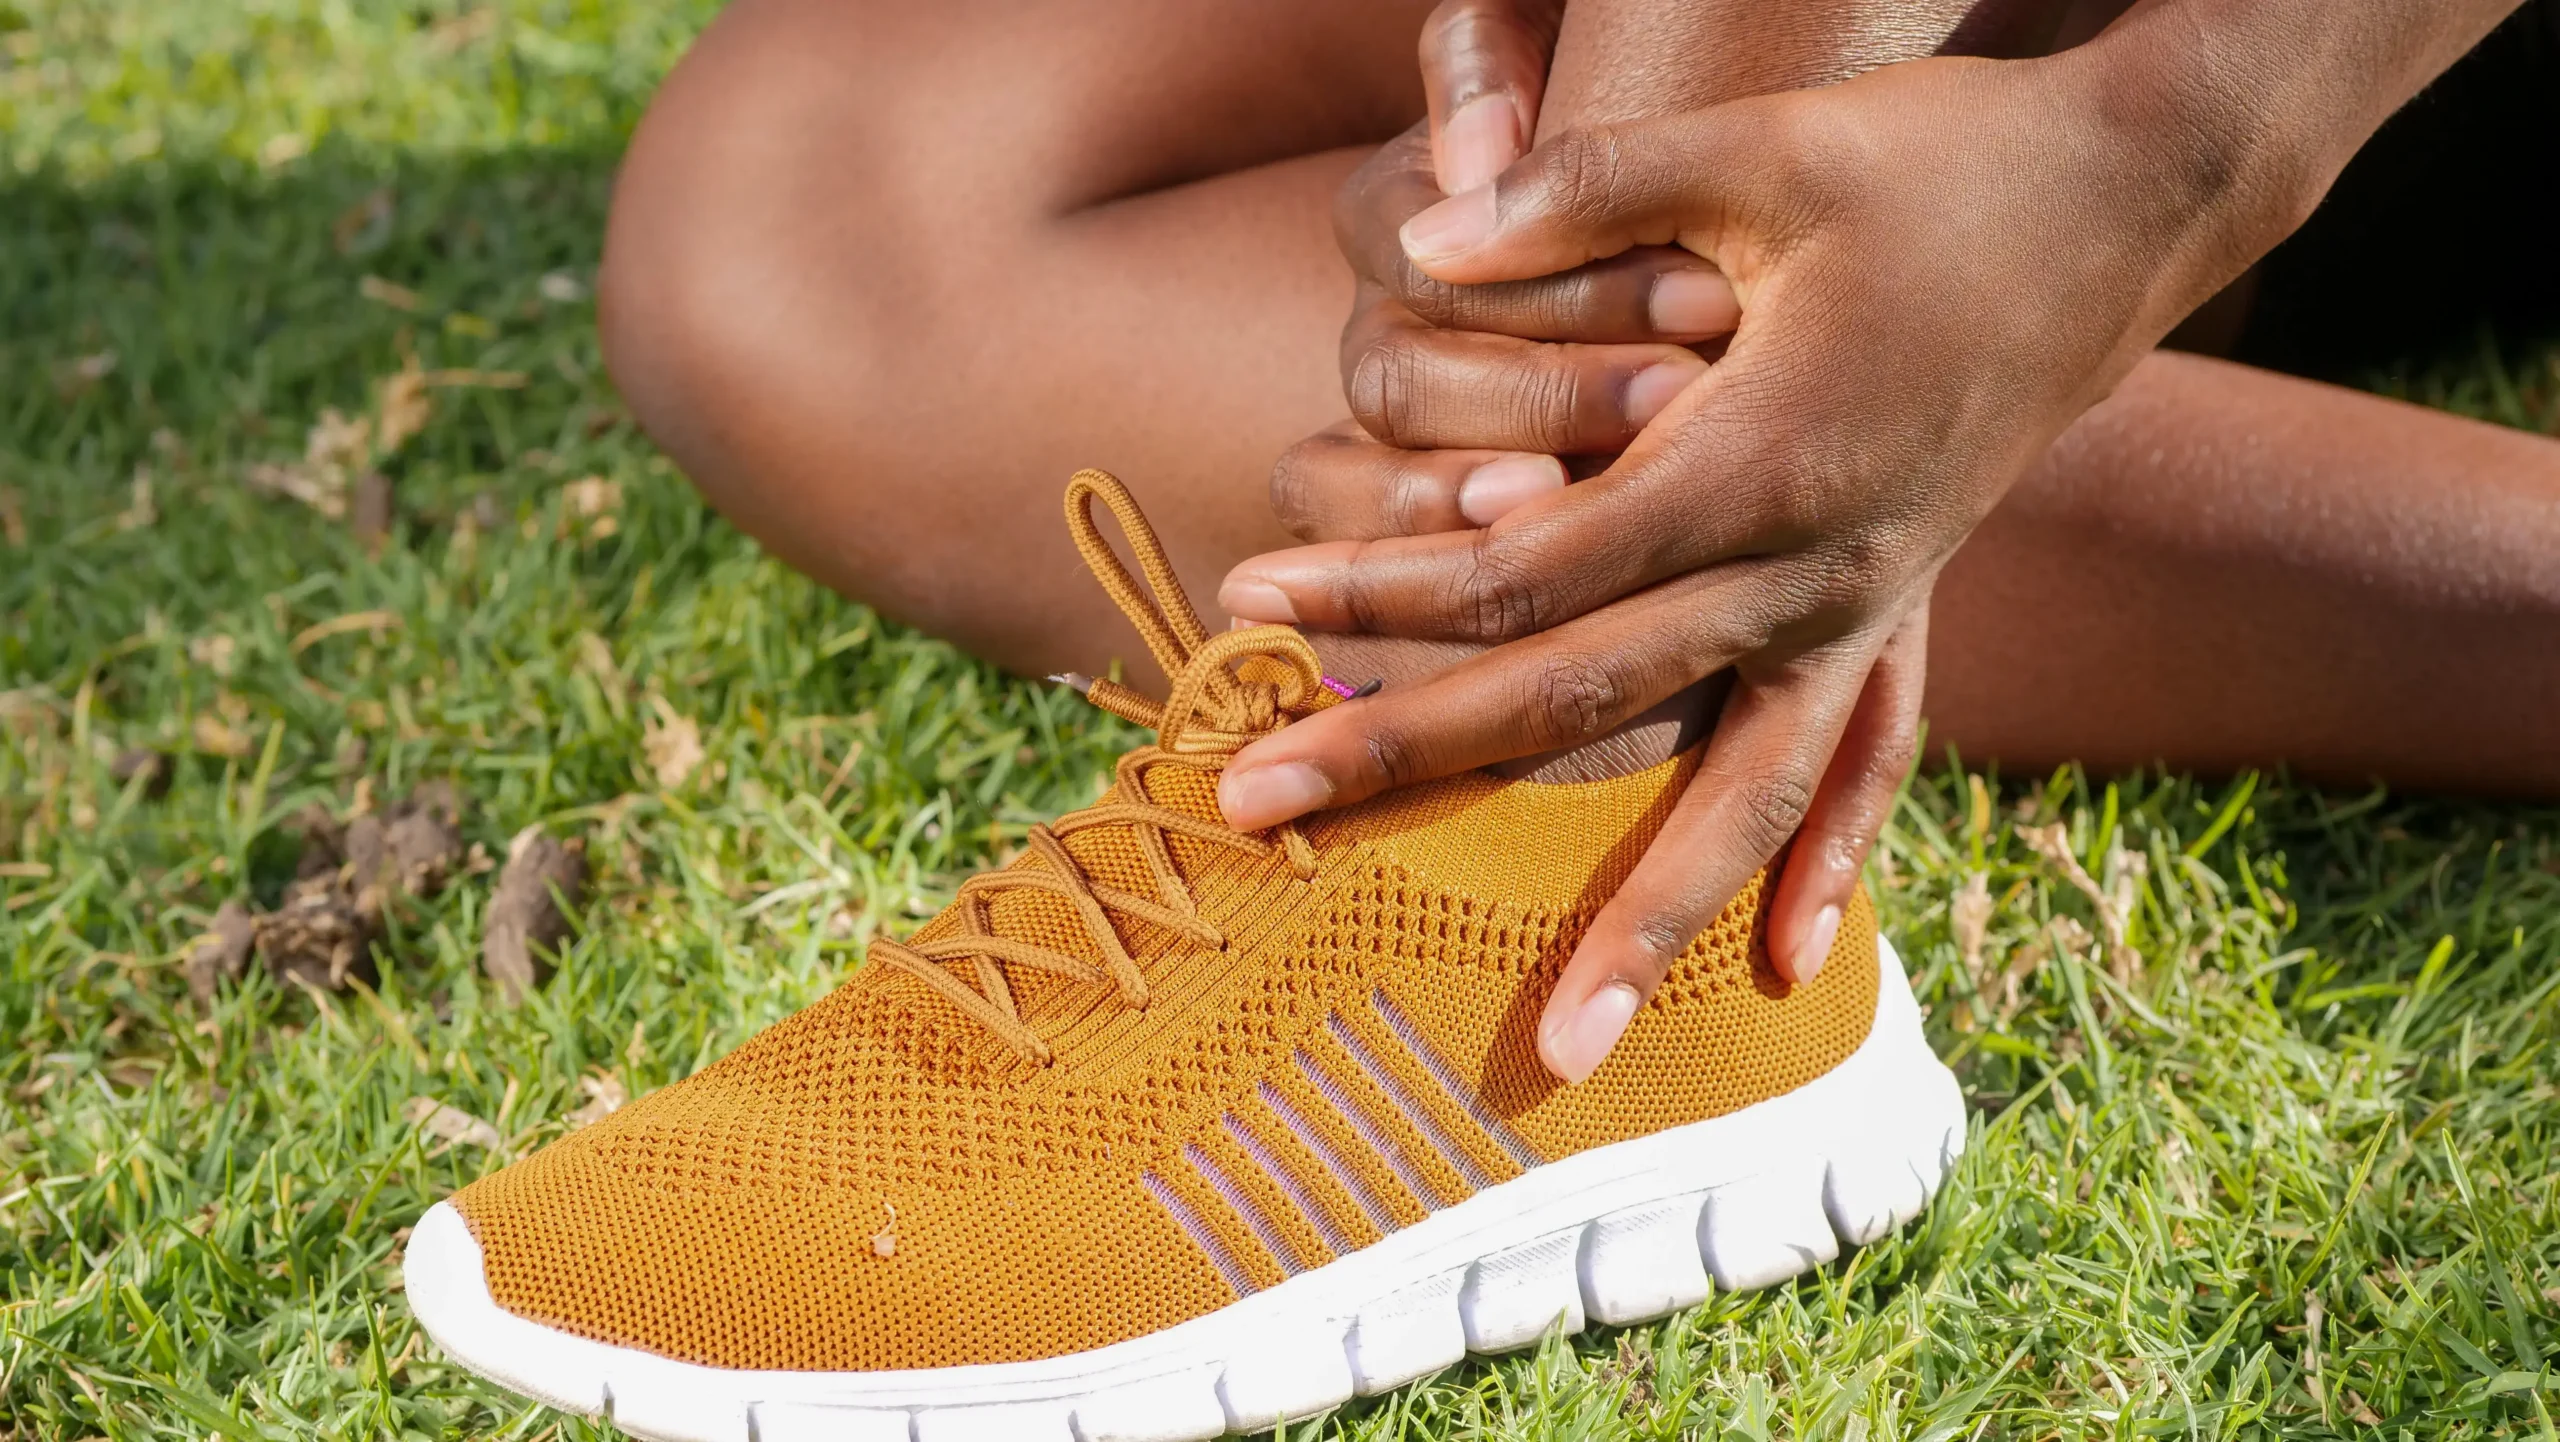 Affordable Foot and Ankle Pain Treatment in Clifton, NJ